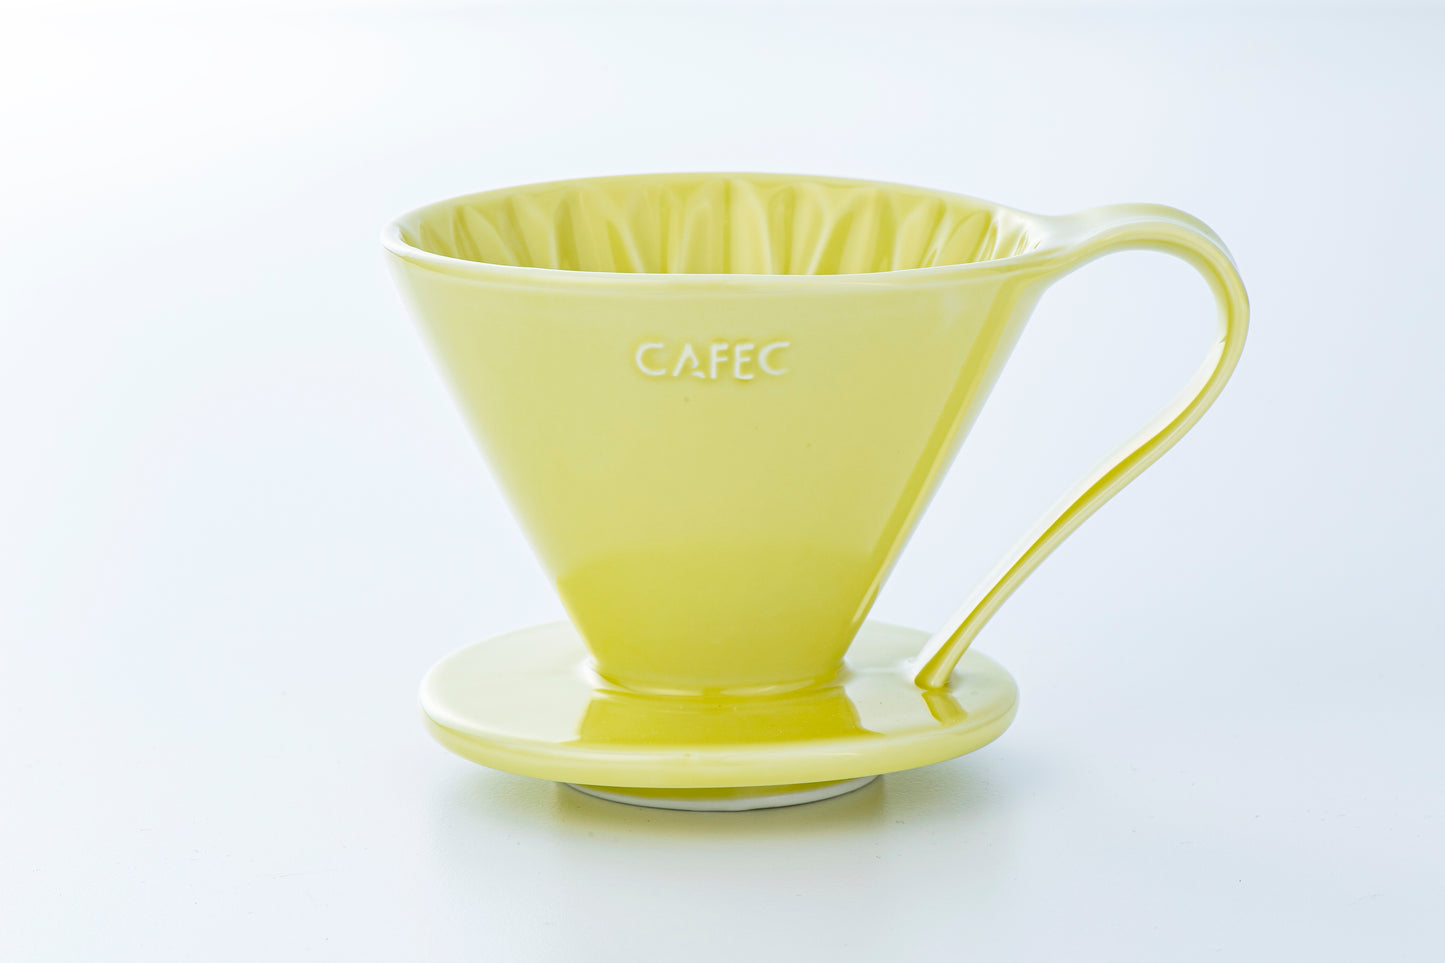 Cafec - Flower Dripper Cone-Shaped Cup 04